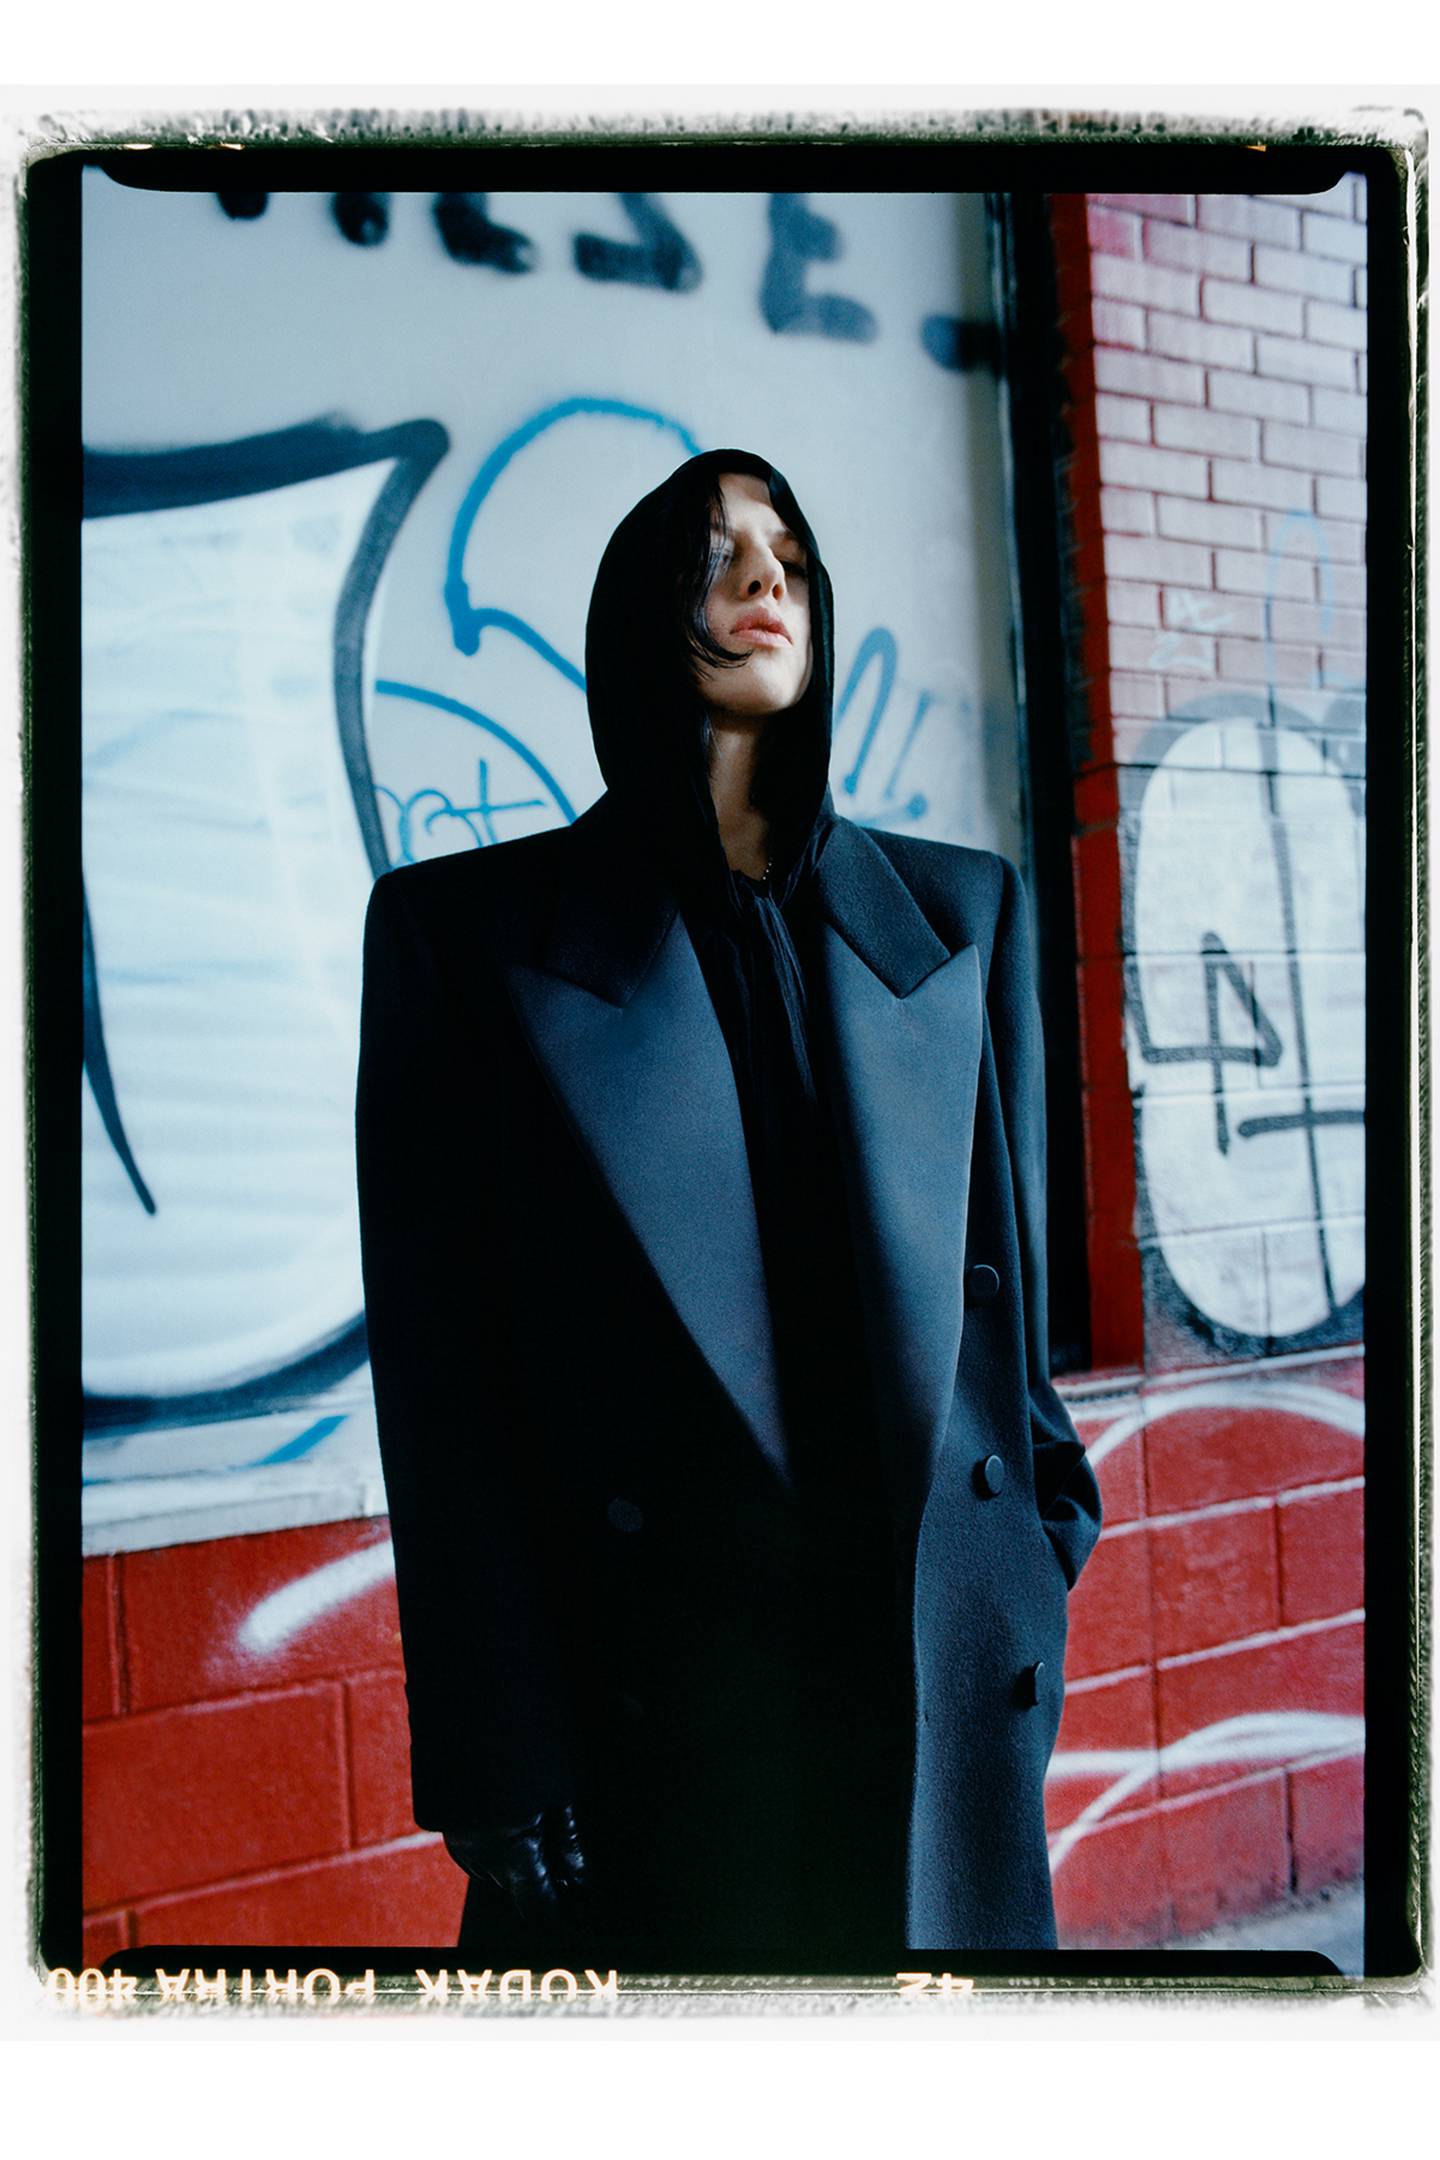 Anne Imhof wearing Saint Laurent by Anthony Vaccarello in New York, May 2023. Photographed by Joshua Woods, styled by Marc Goehring.